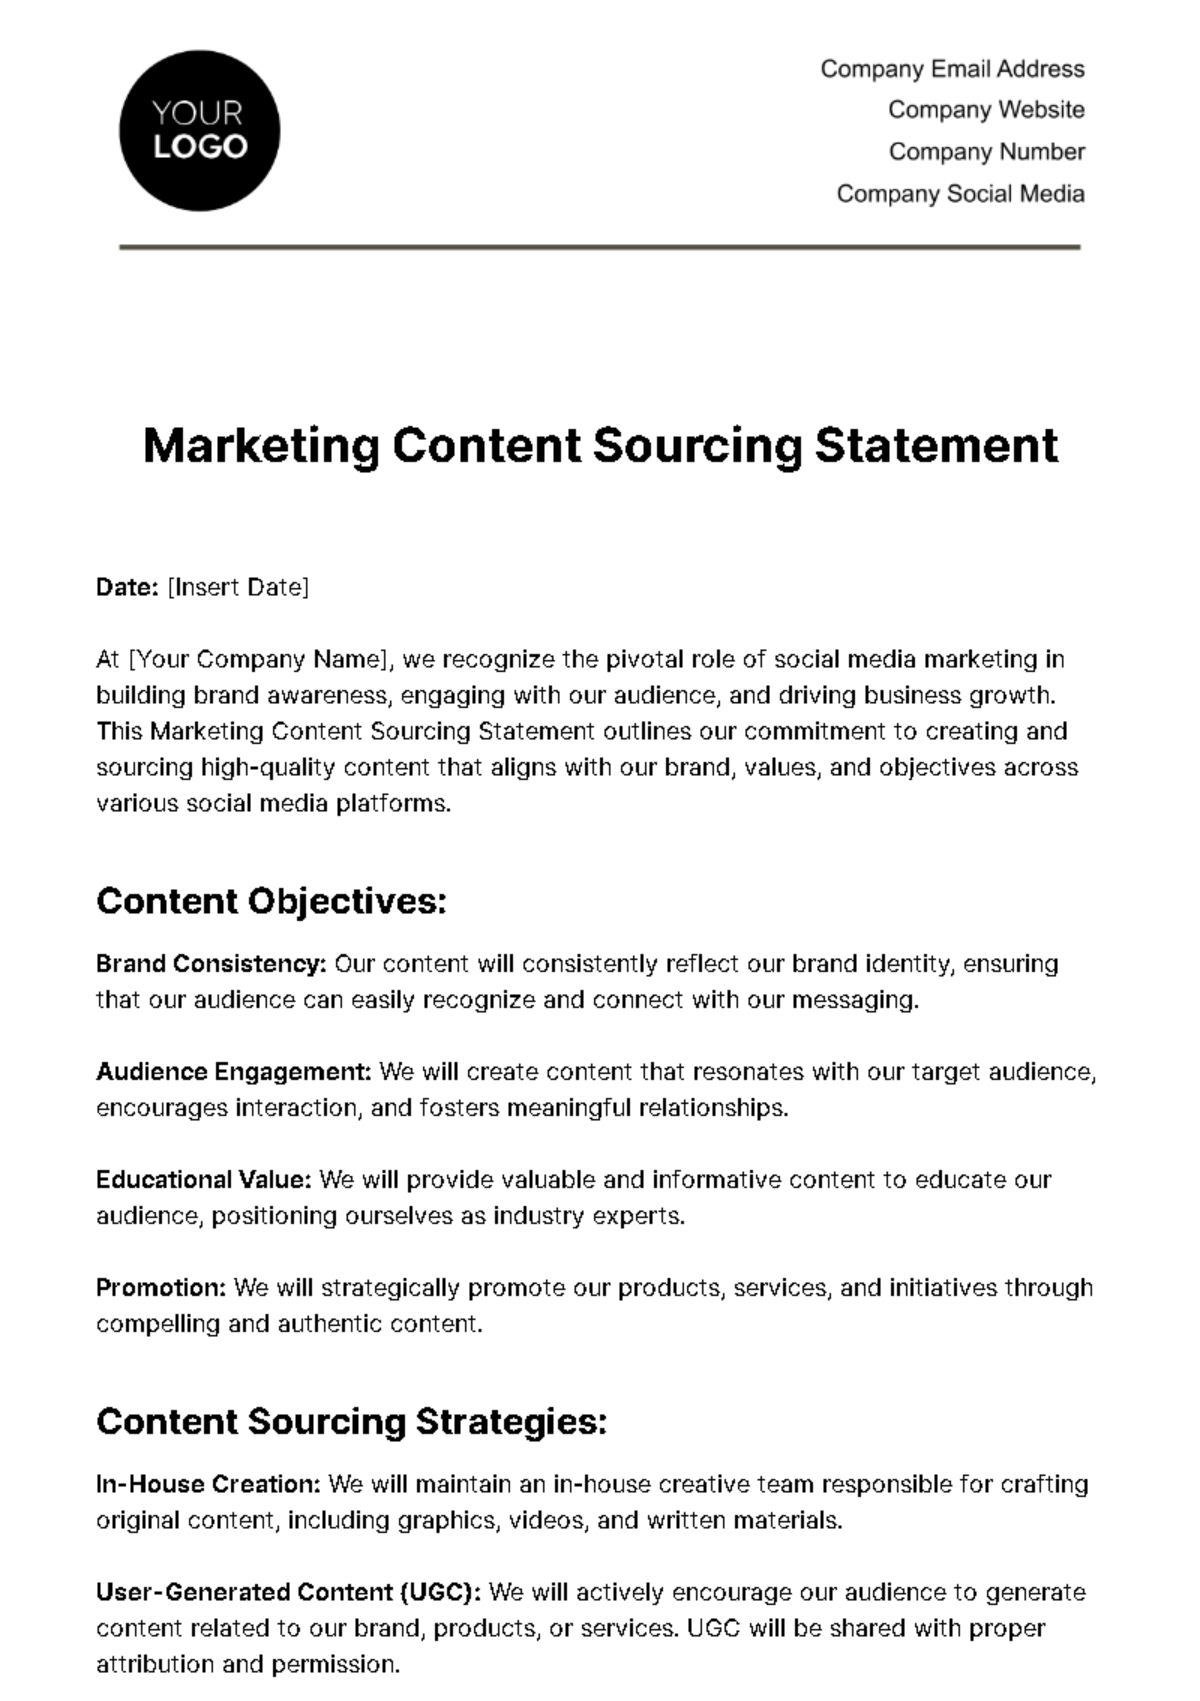 Free Marketing Content Sourcing Statement Template